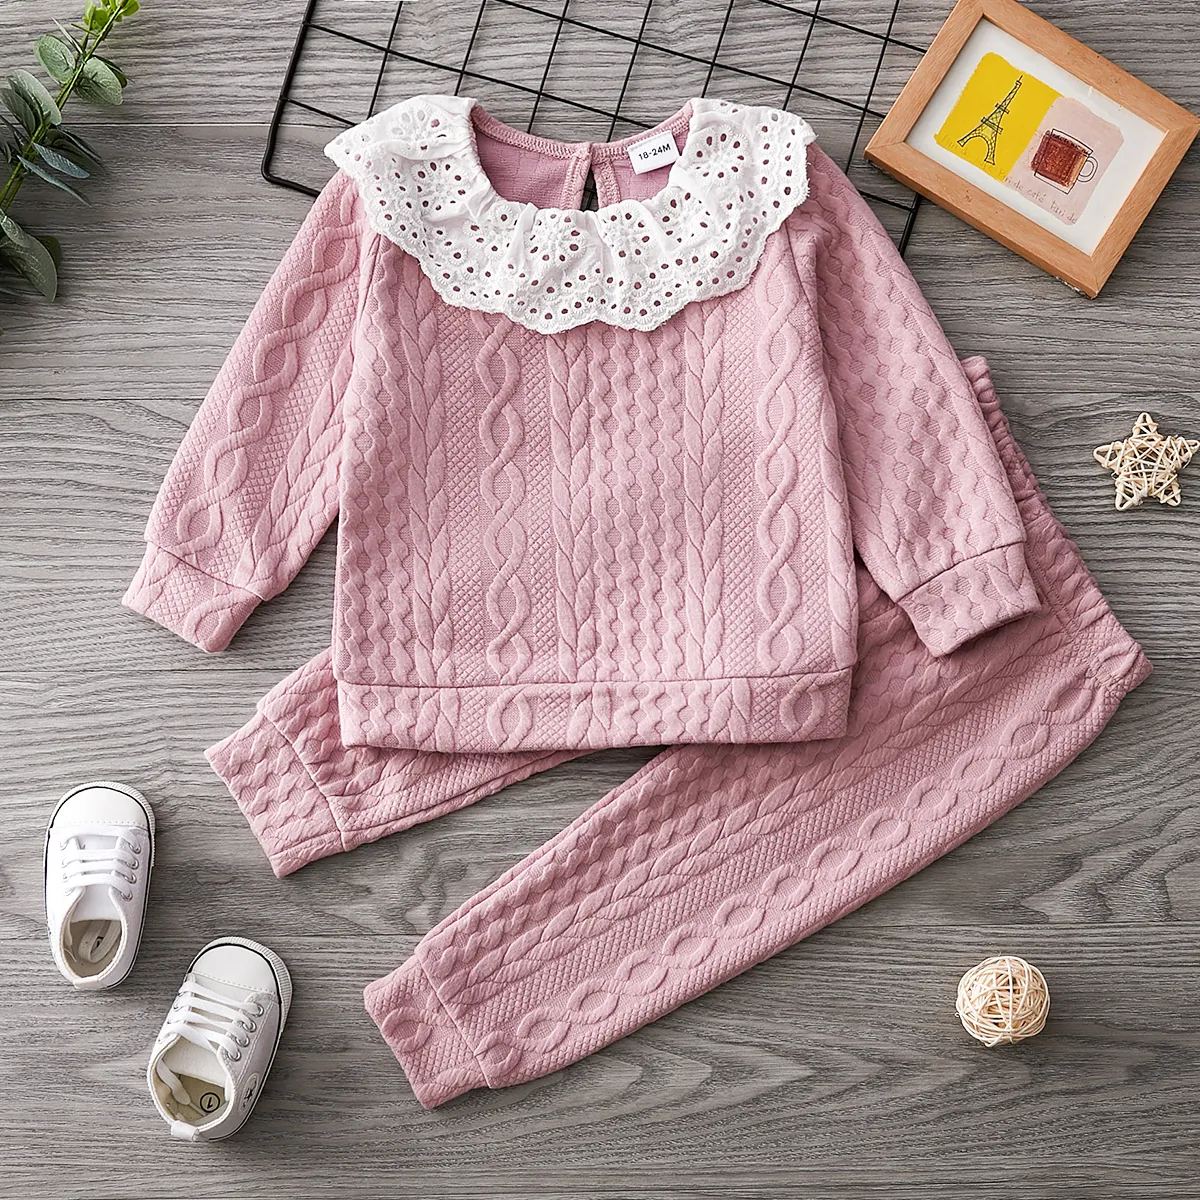 2-piece Toddler Girl Schiffy Flounce Cable Knit Sweater and Pants Set Pink big image 1